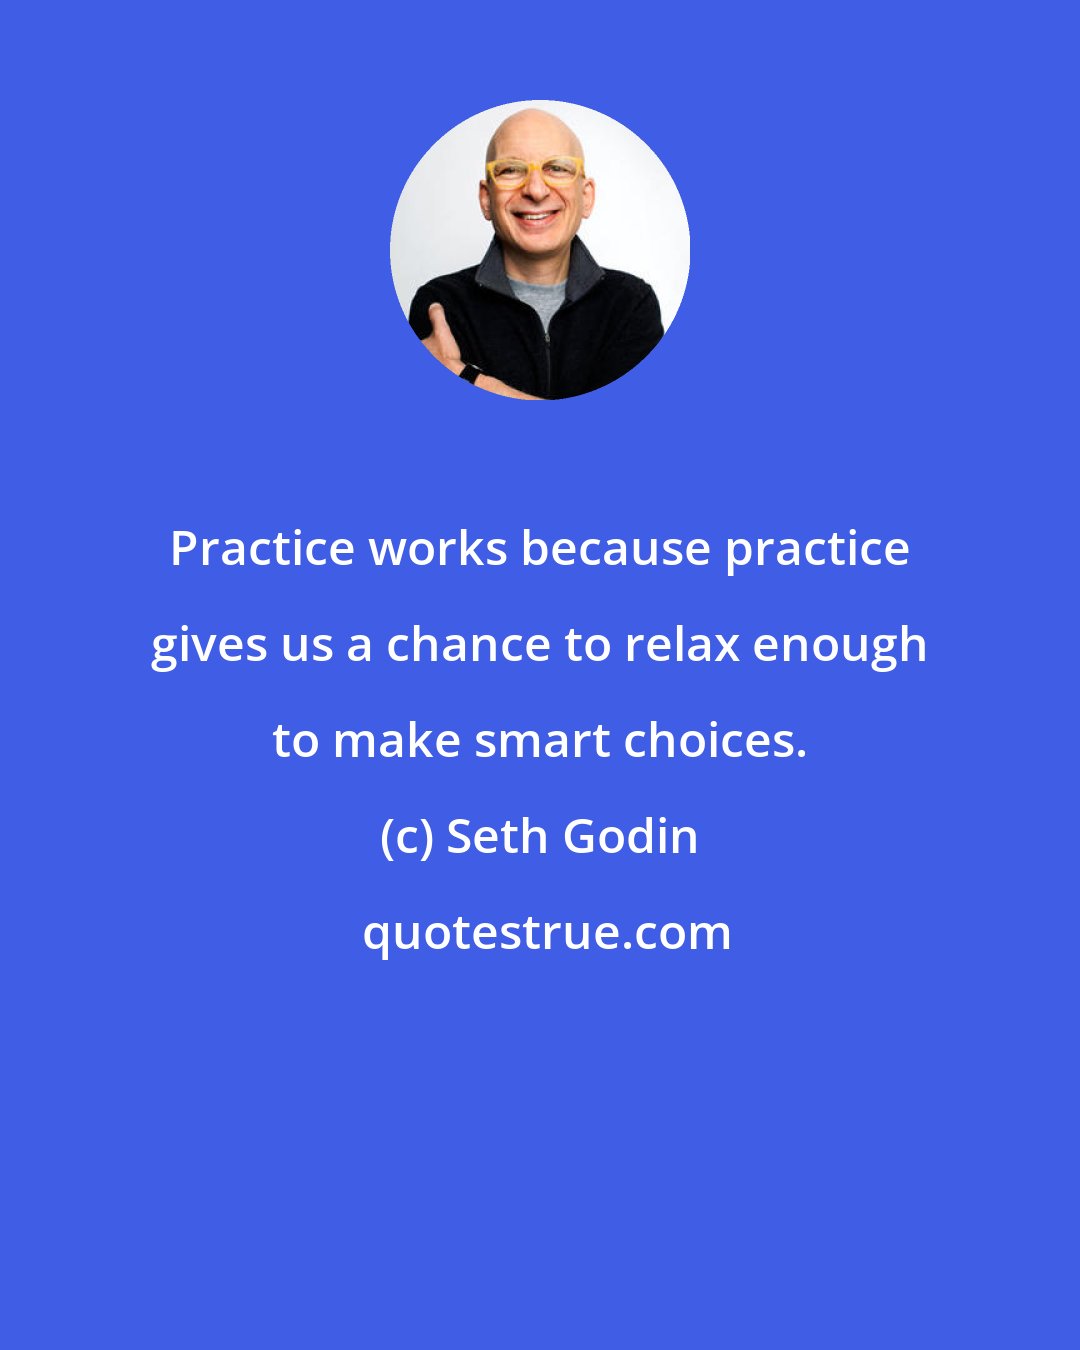 Seth Godin: Practice works because practice gives us a chance to relax enough to make smart choices.